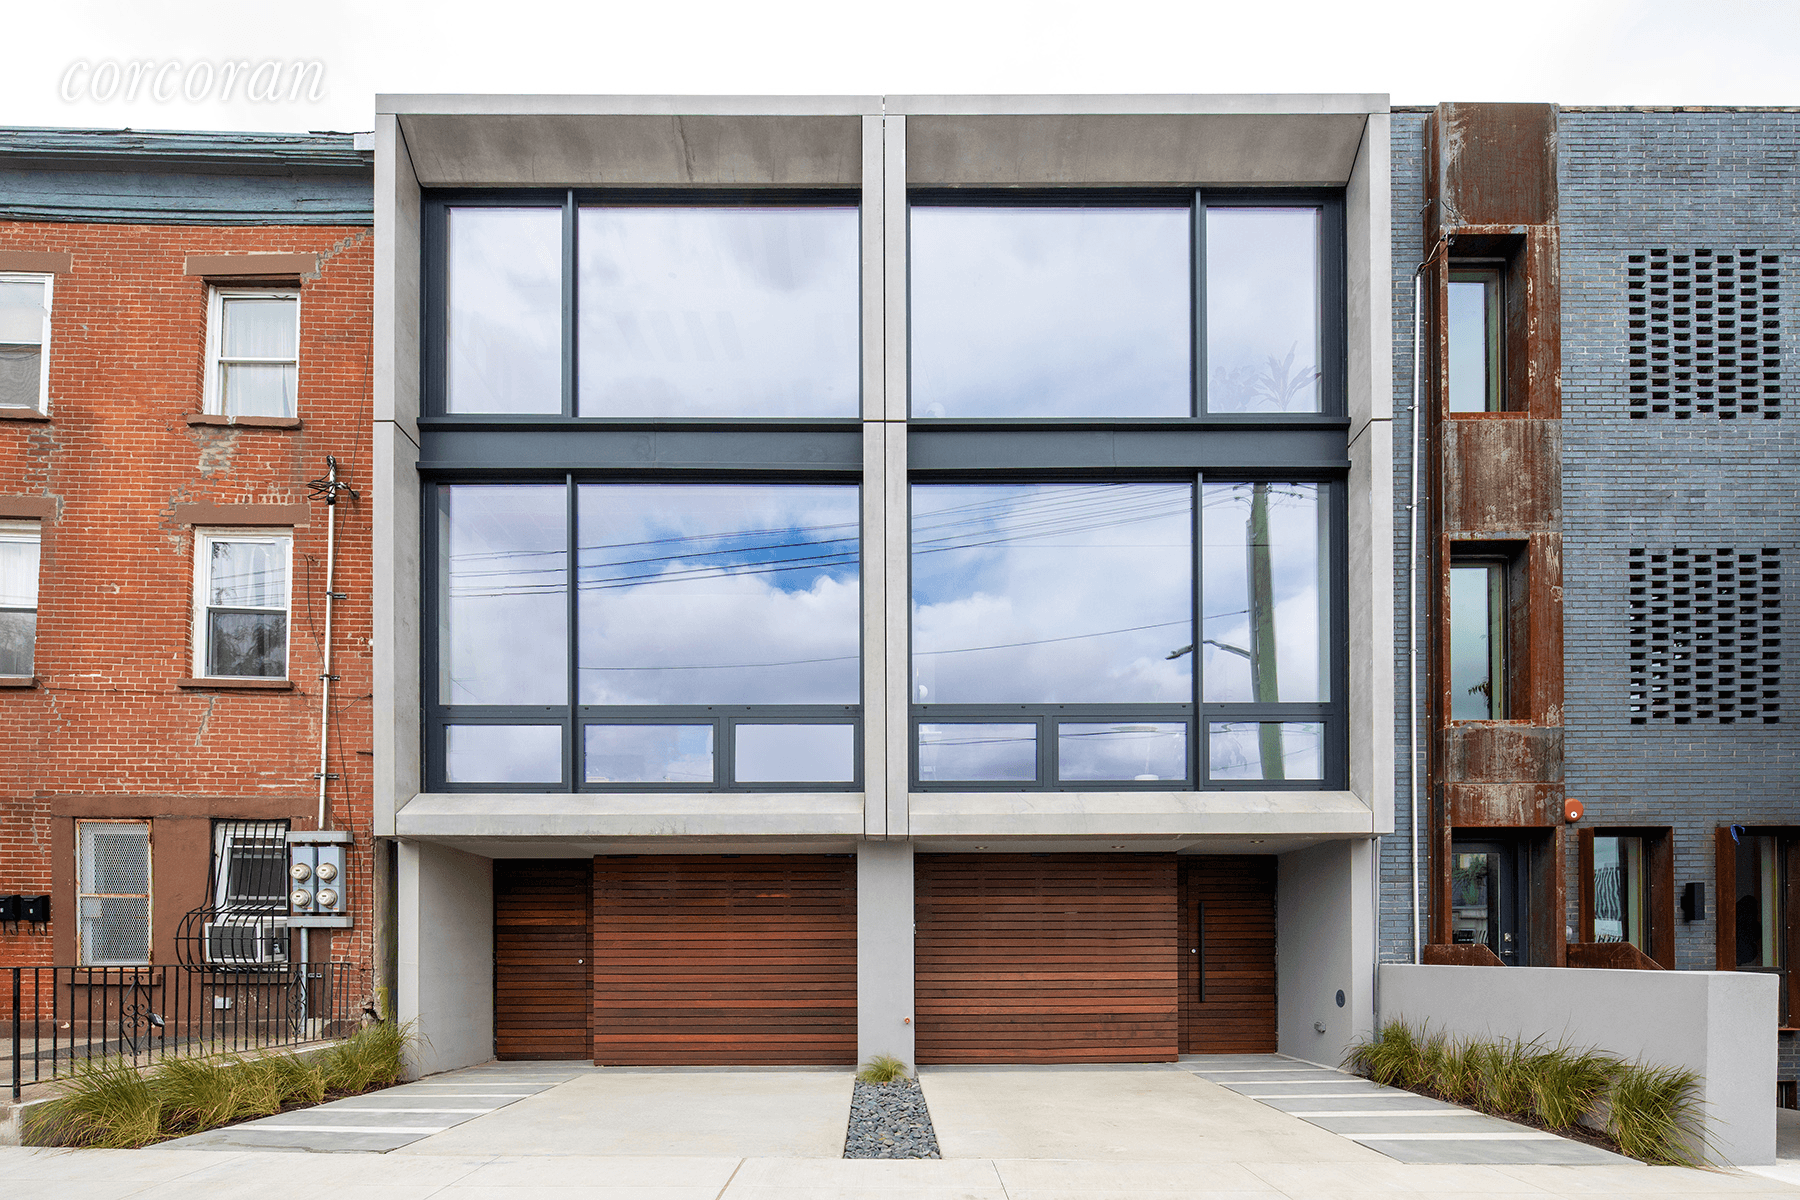 Completed in 2018 by architect developer Barrett Design, 96 amp ; 98 Degraw Street are two beautiful contemporary townhouses located in the heart of the Columbia Waterfront District.